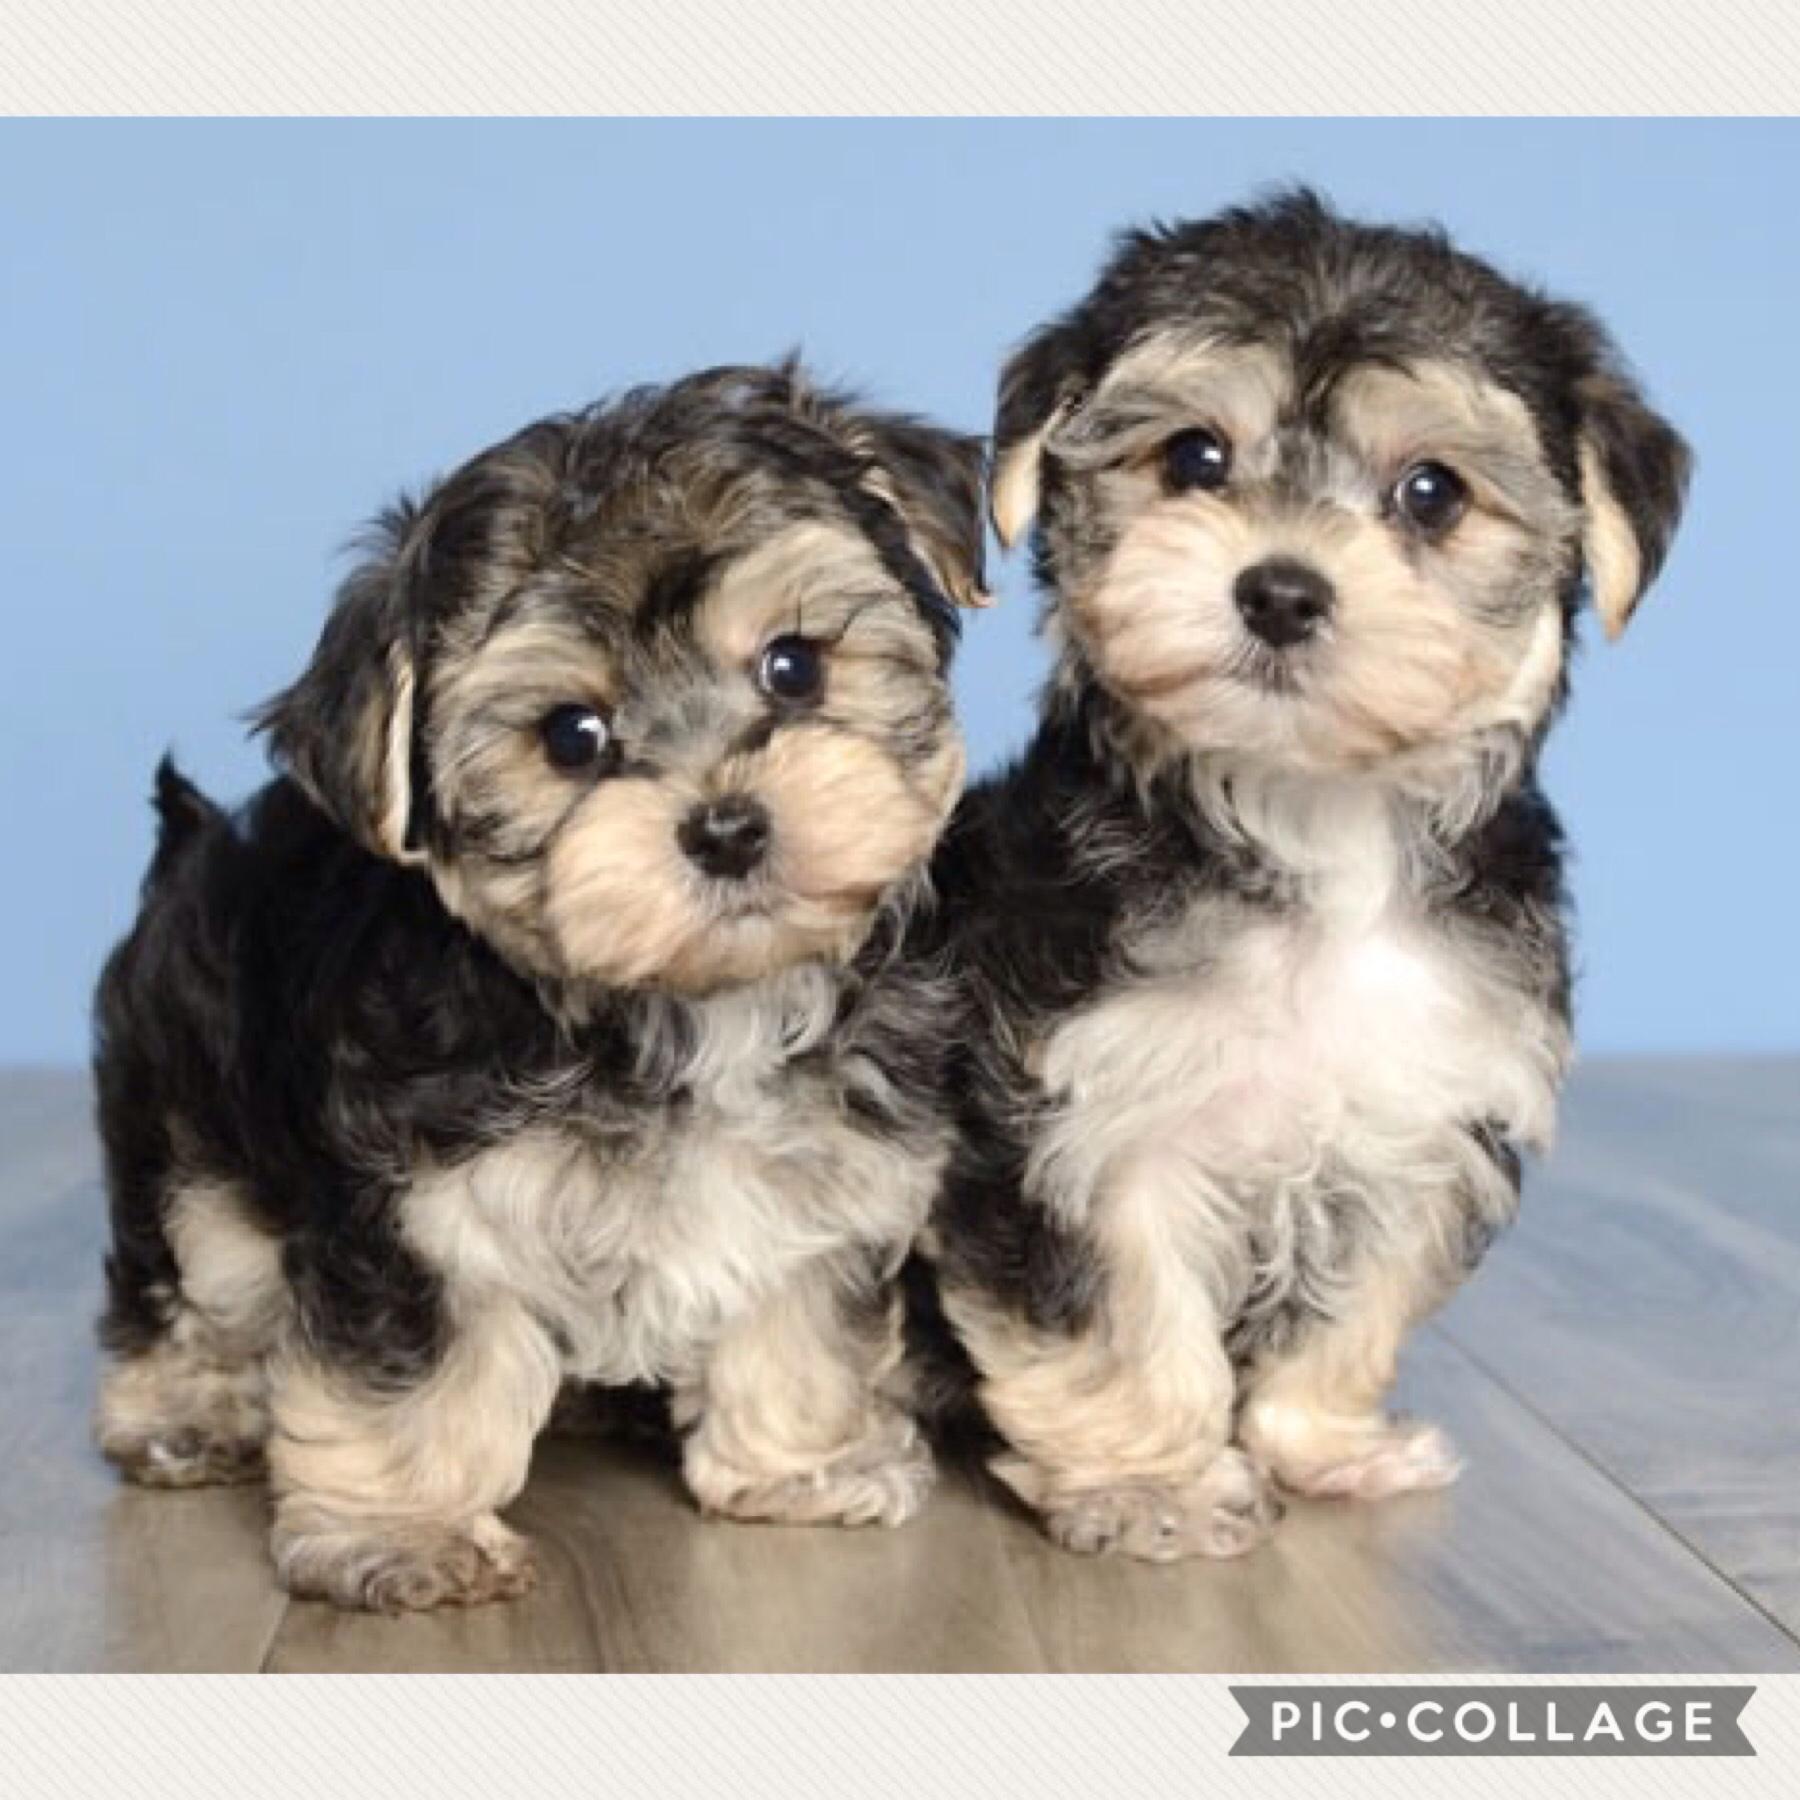 Look at my to new puppies # got them today 